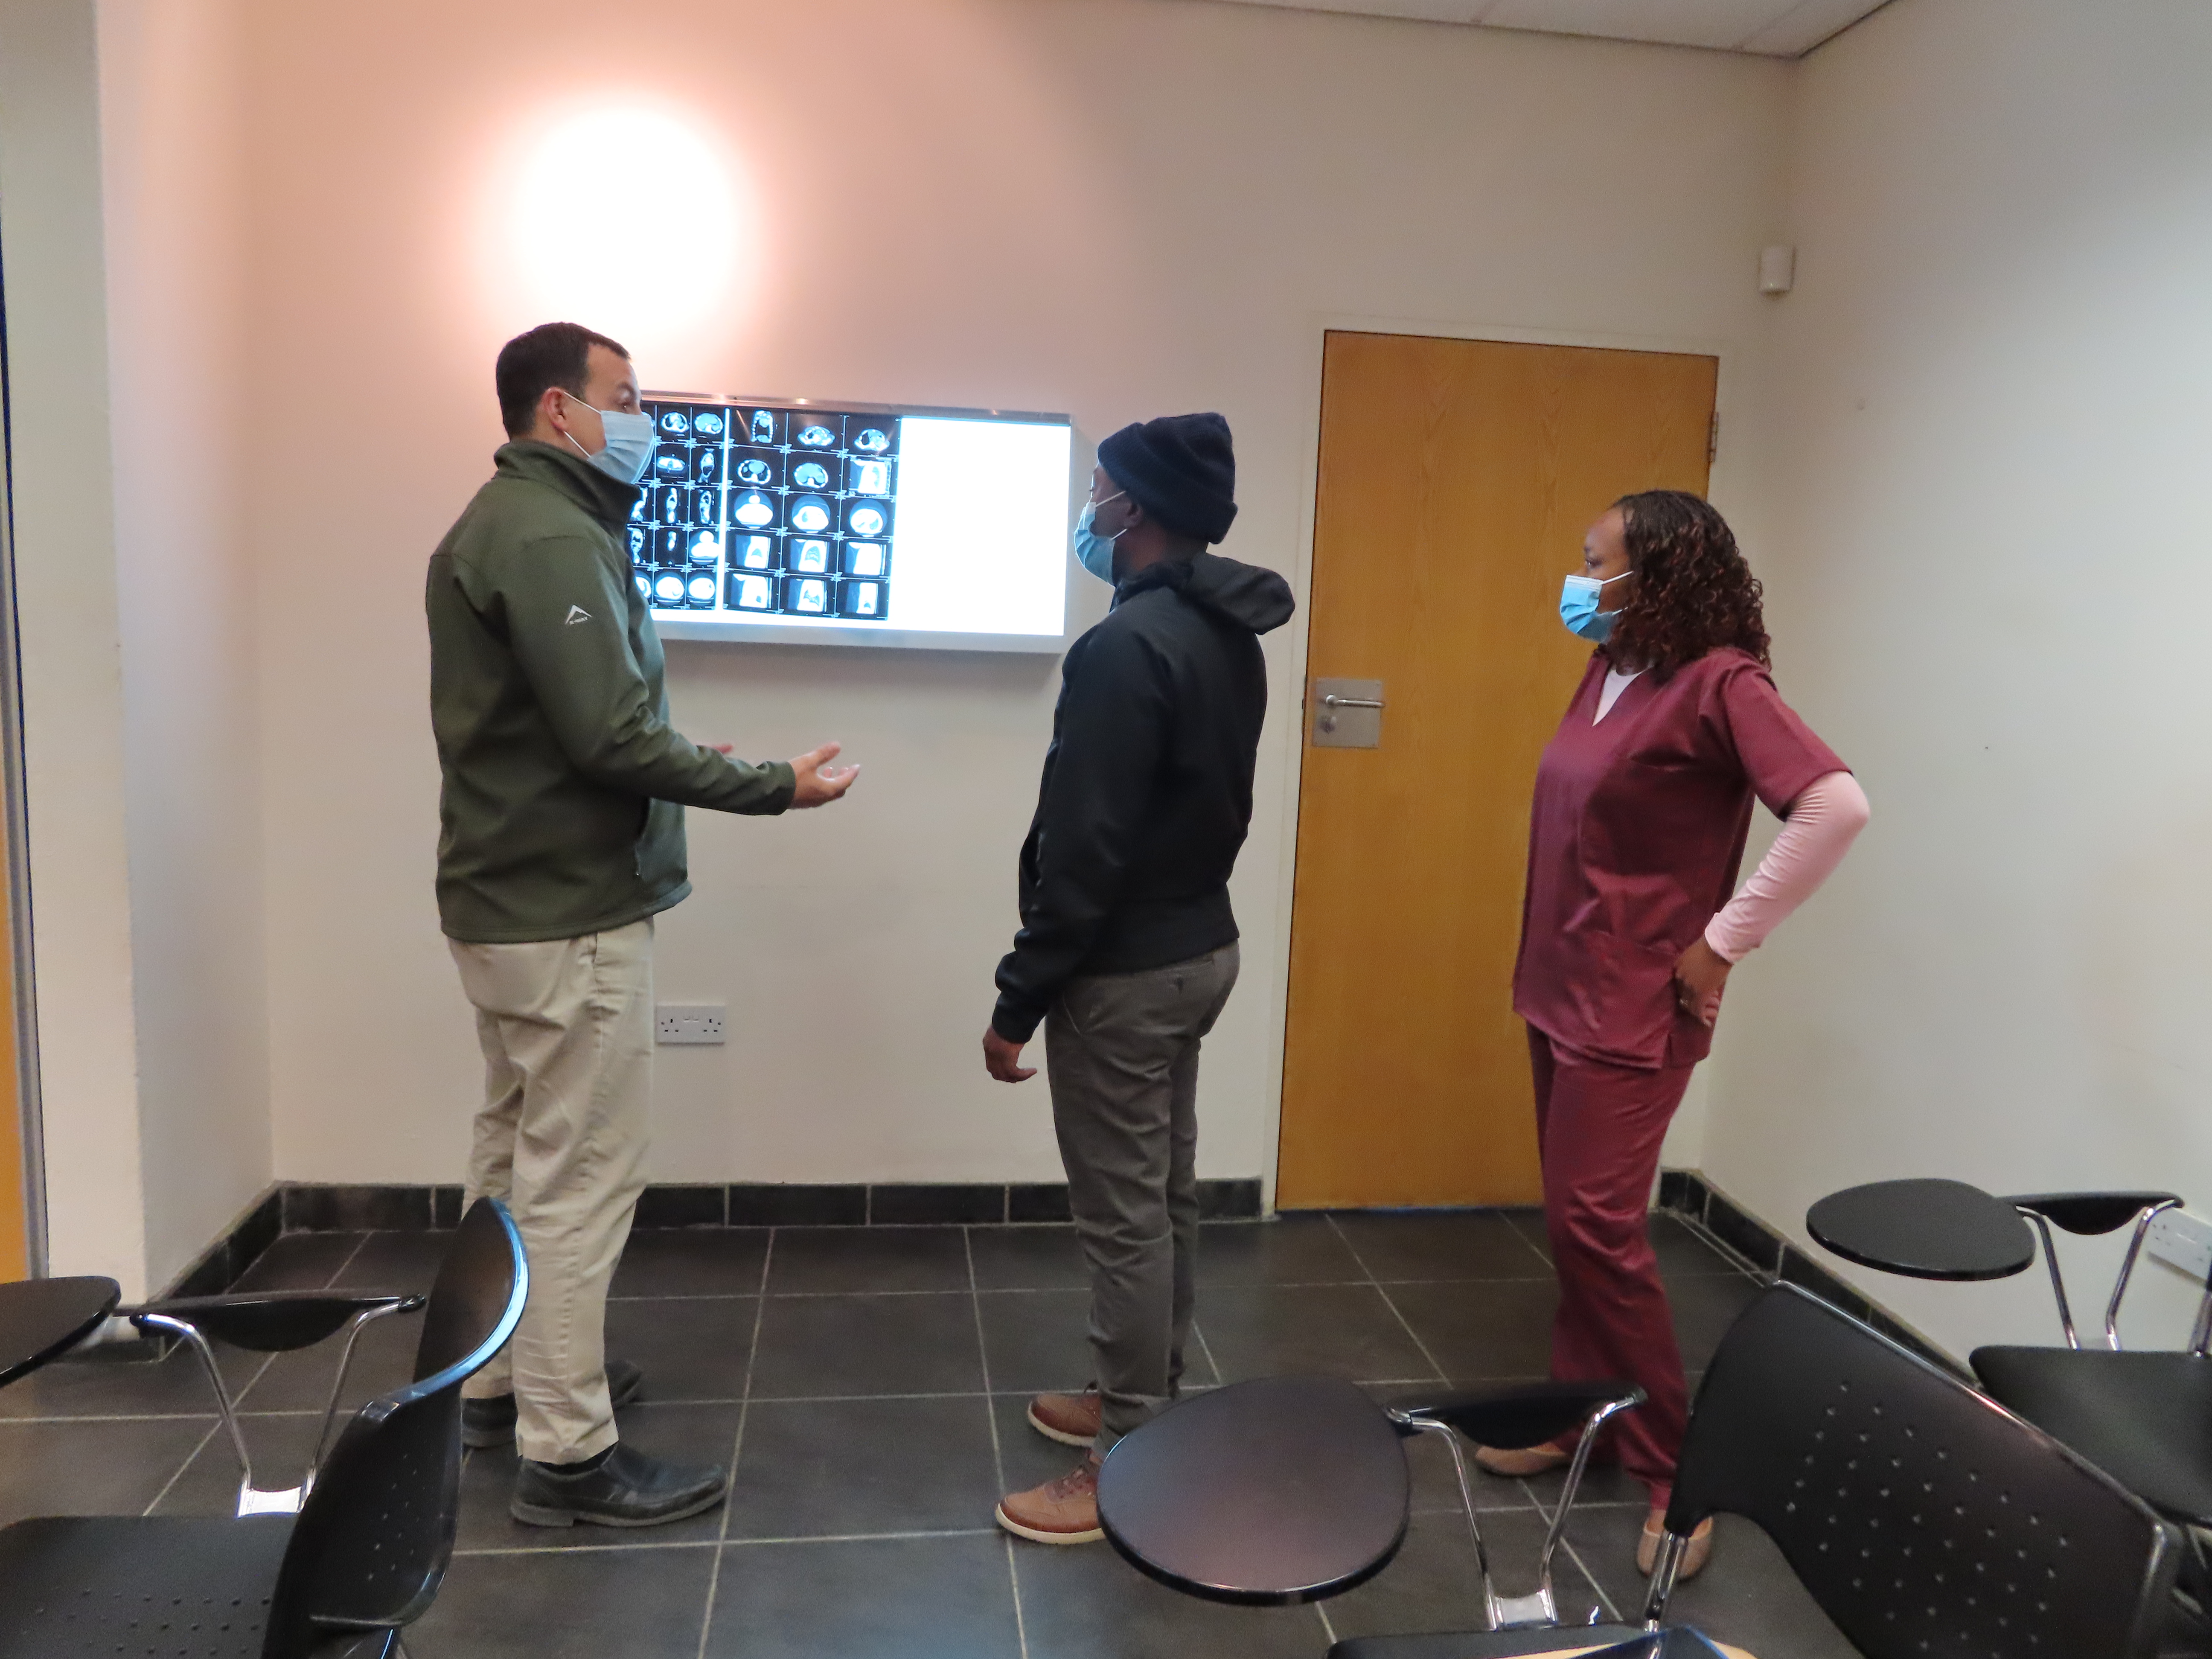 Dr. Sloane discusses MRI images with two fellows at the Botswana Global HOPE Center for Excellence.